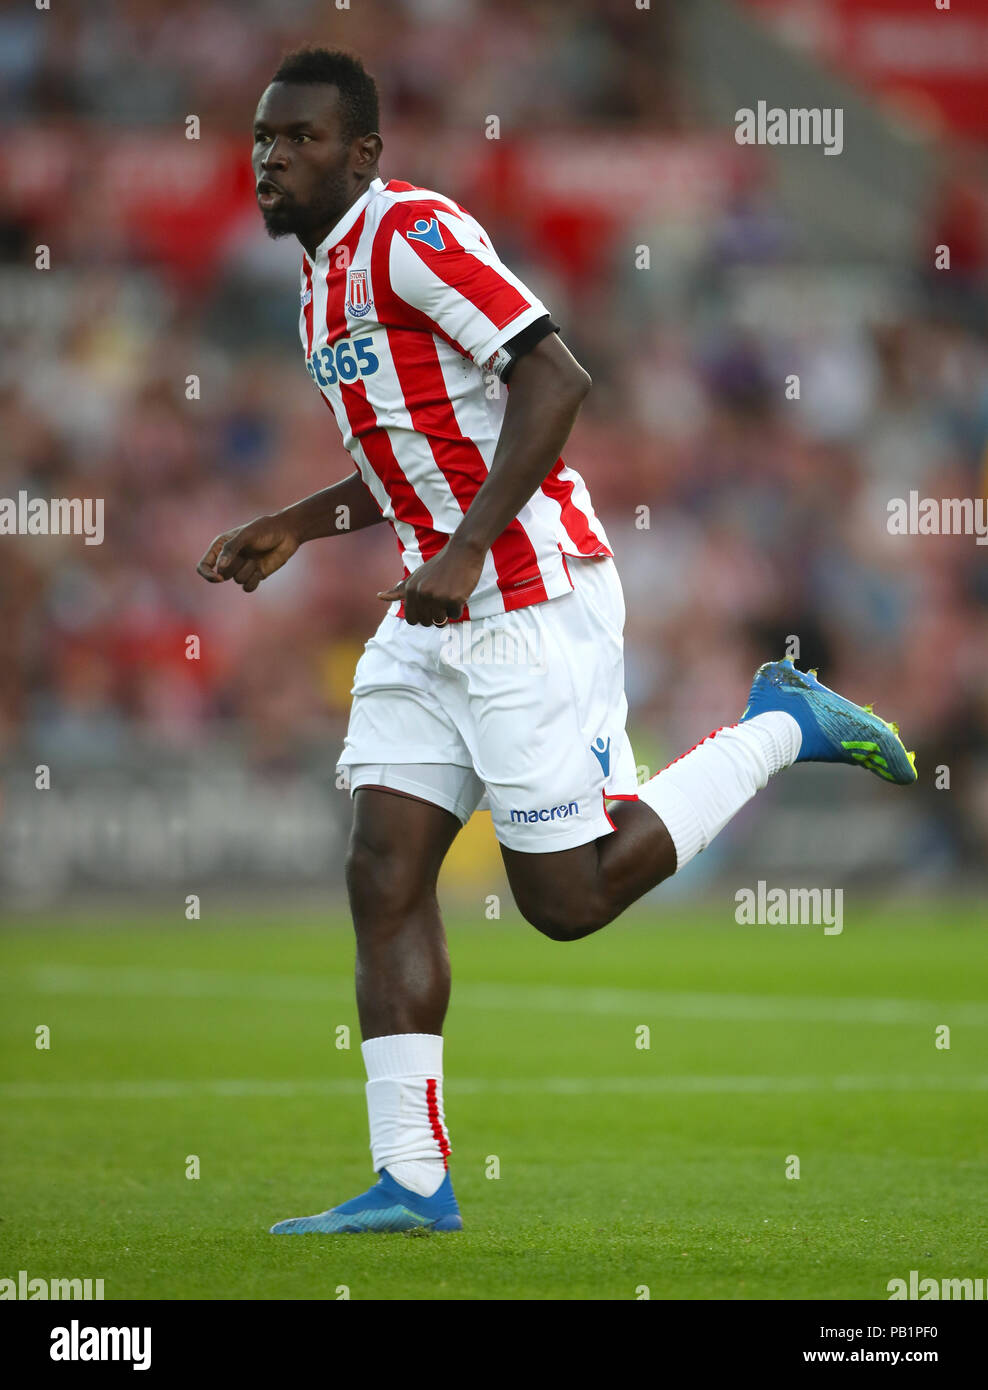 Stoke City's Mame Diouf during a pre season friendly match at The Bet365 Stadium, Stoke. PRESS ASSOCIATION Photo. Picture date: Wednesday July 25, 2018. Photo credit should read: Nick Potts/PA Wire. EDITORIAL USE ONLY No use with unauthorised audio, video, data, fixture lists, club/league logos or 'live' services. Online in-match use limited to 75 images, no video emulation. No use in betting, games or single club/league/player publications. Stock Photo